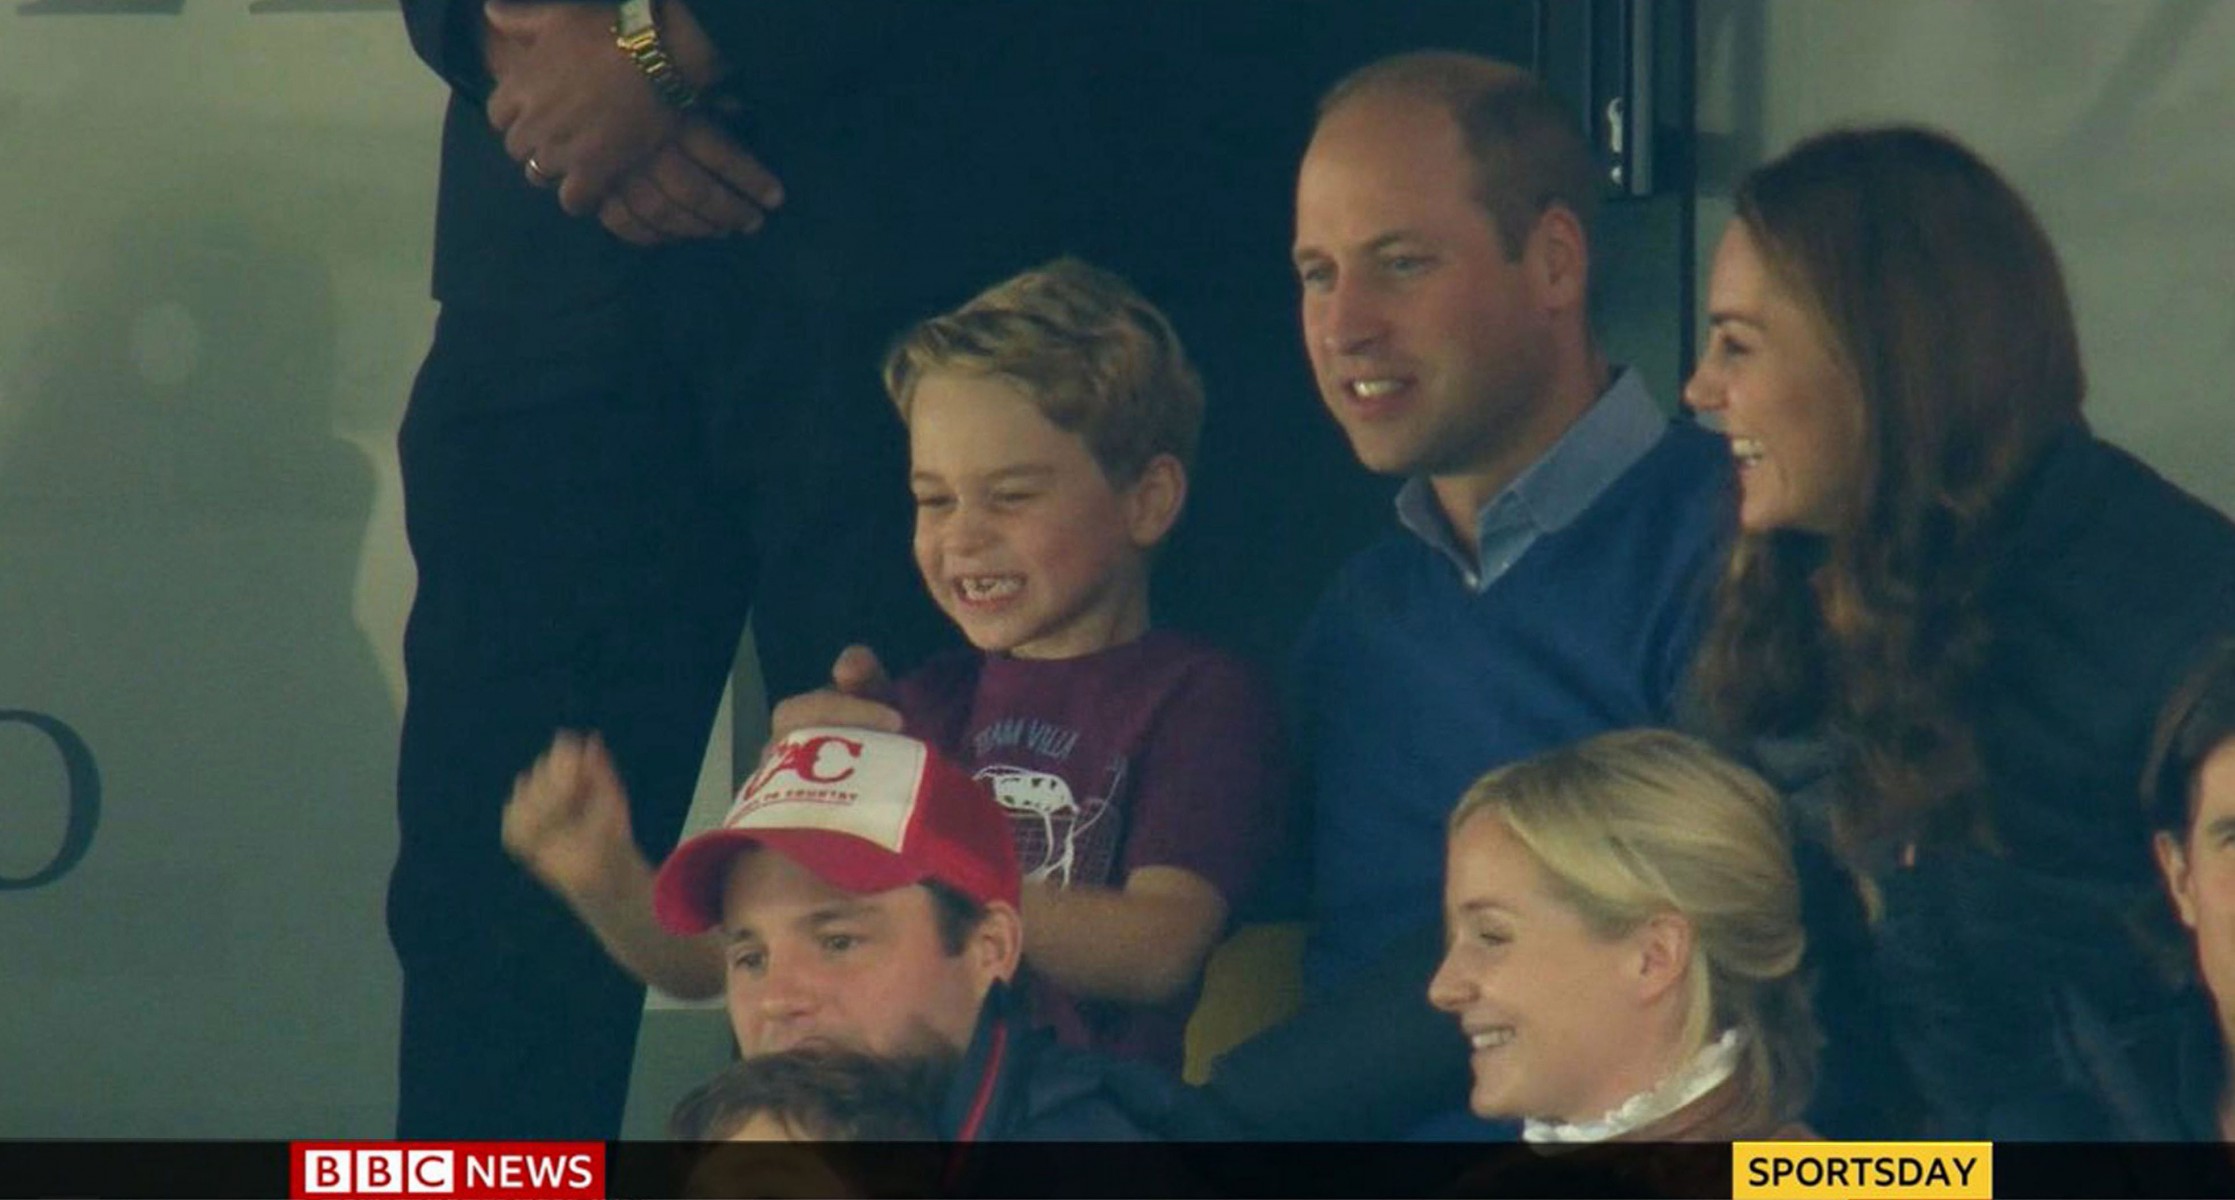 Lampard tried to convince Prince William to let Prince George support Chelsea instead of Aston Villa